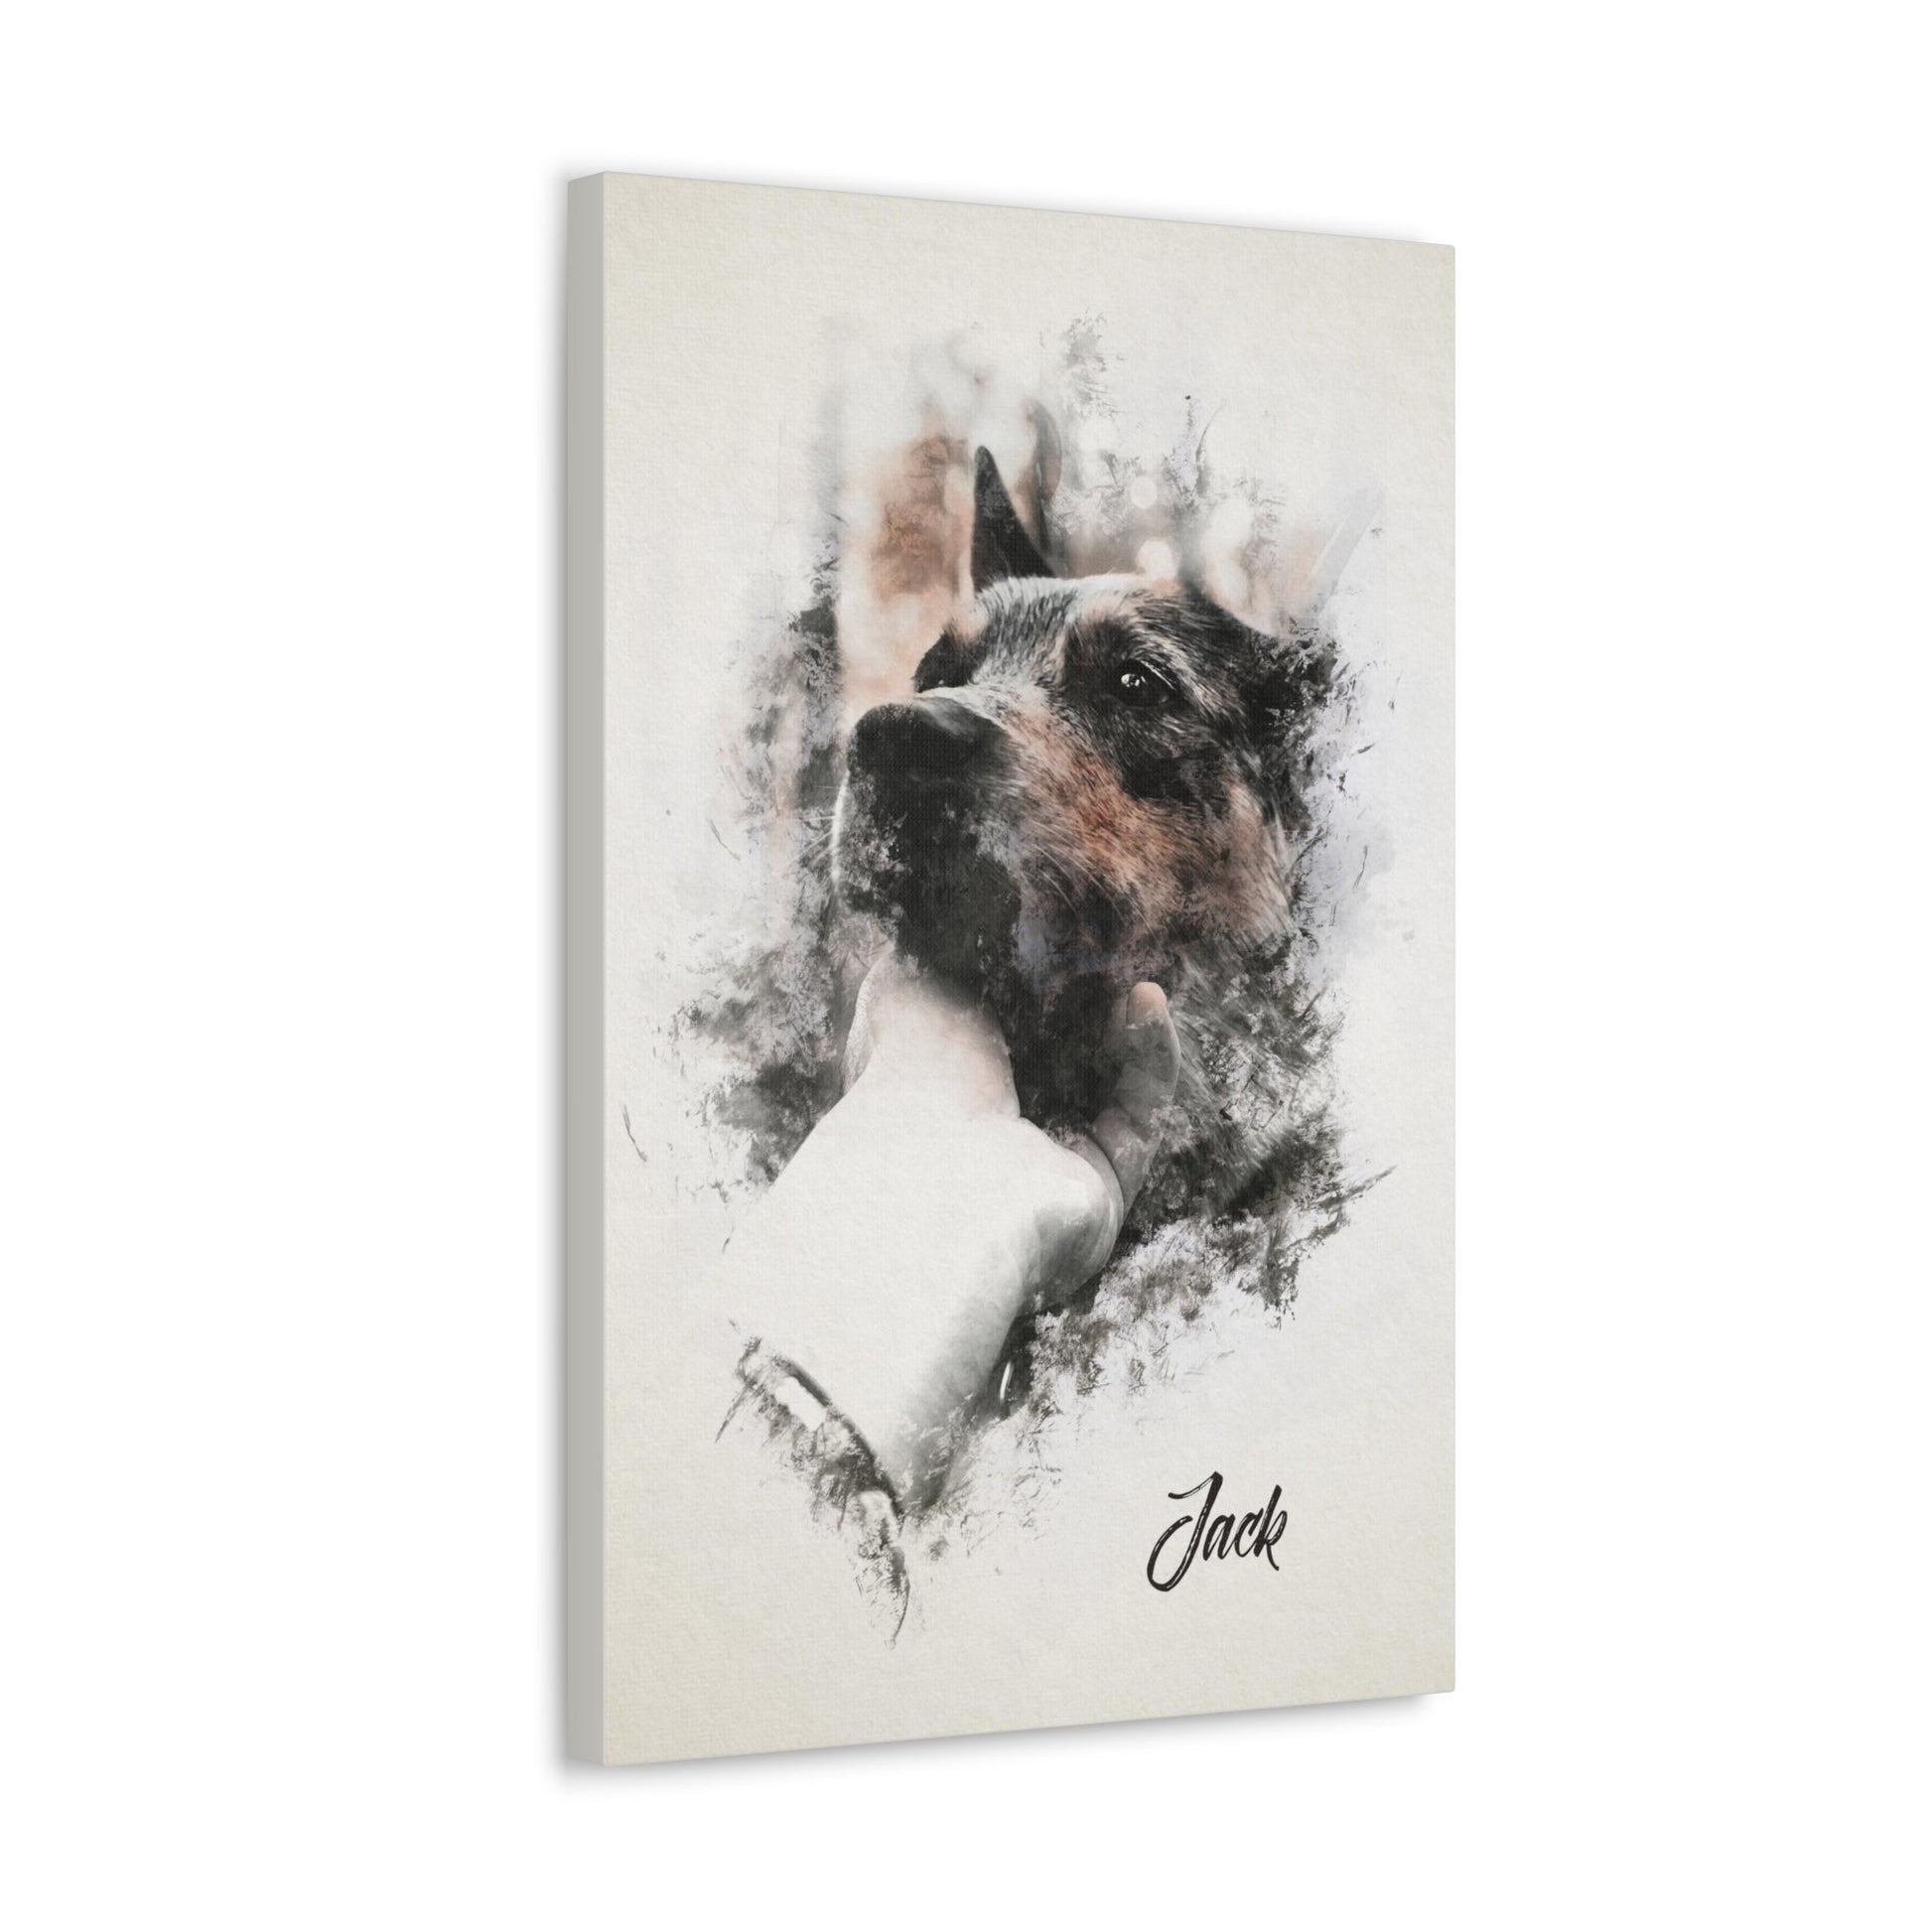 Customized dog portrait on canvas, beautifully stitched for personalization.